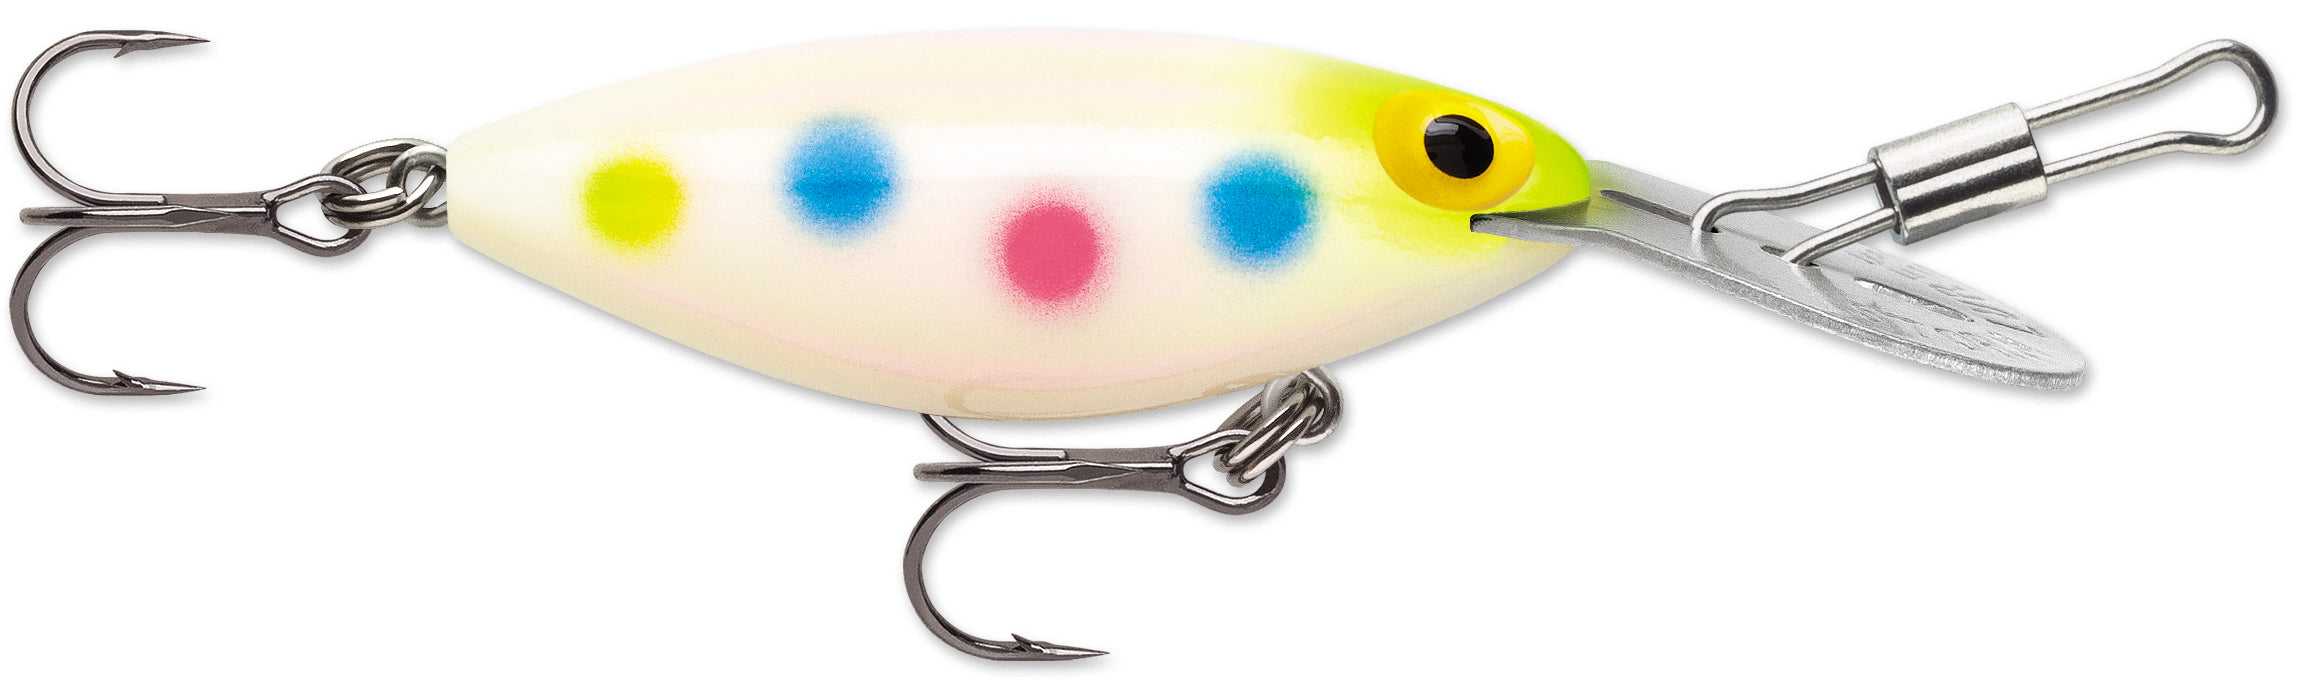 STORM LURES RATTLE TOT Fishing Lure • SOLID CHARTREUSE – Toad Tackle